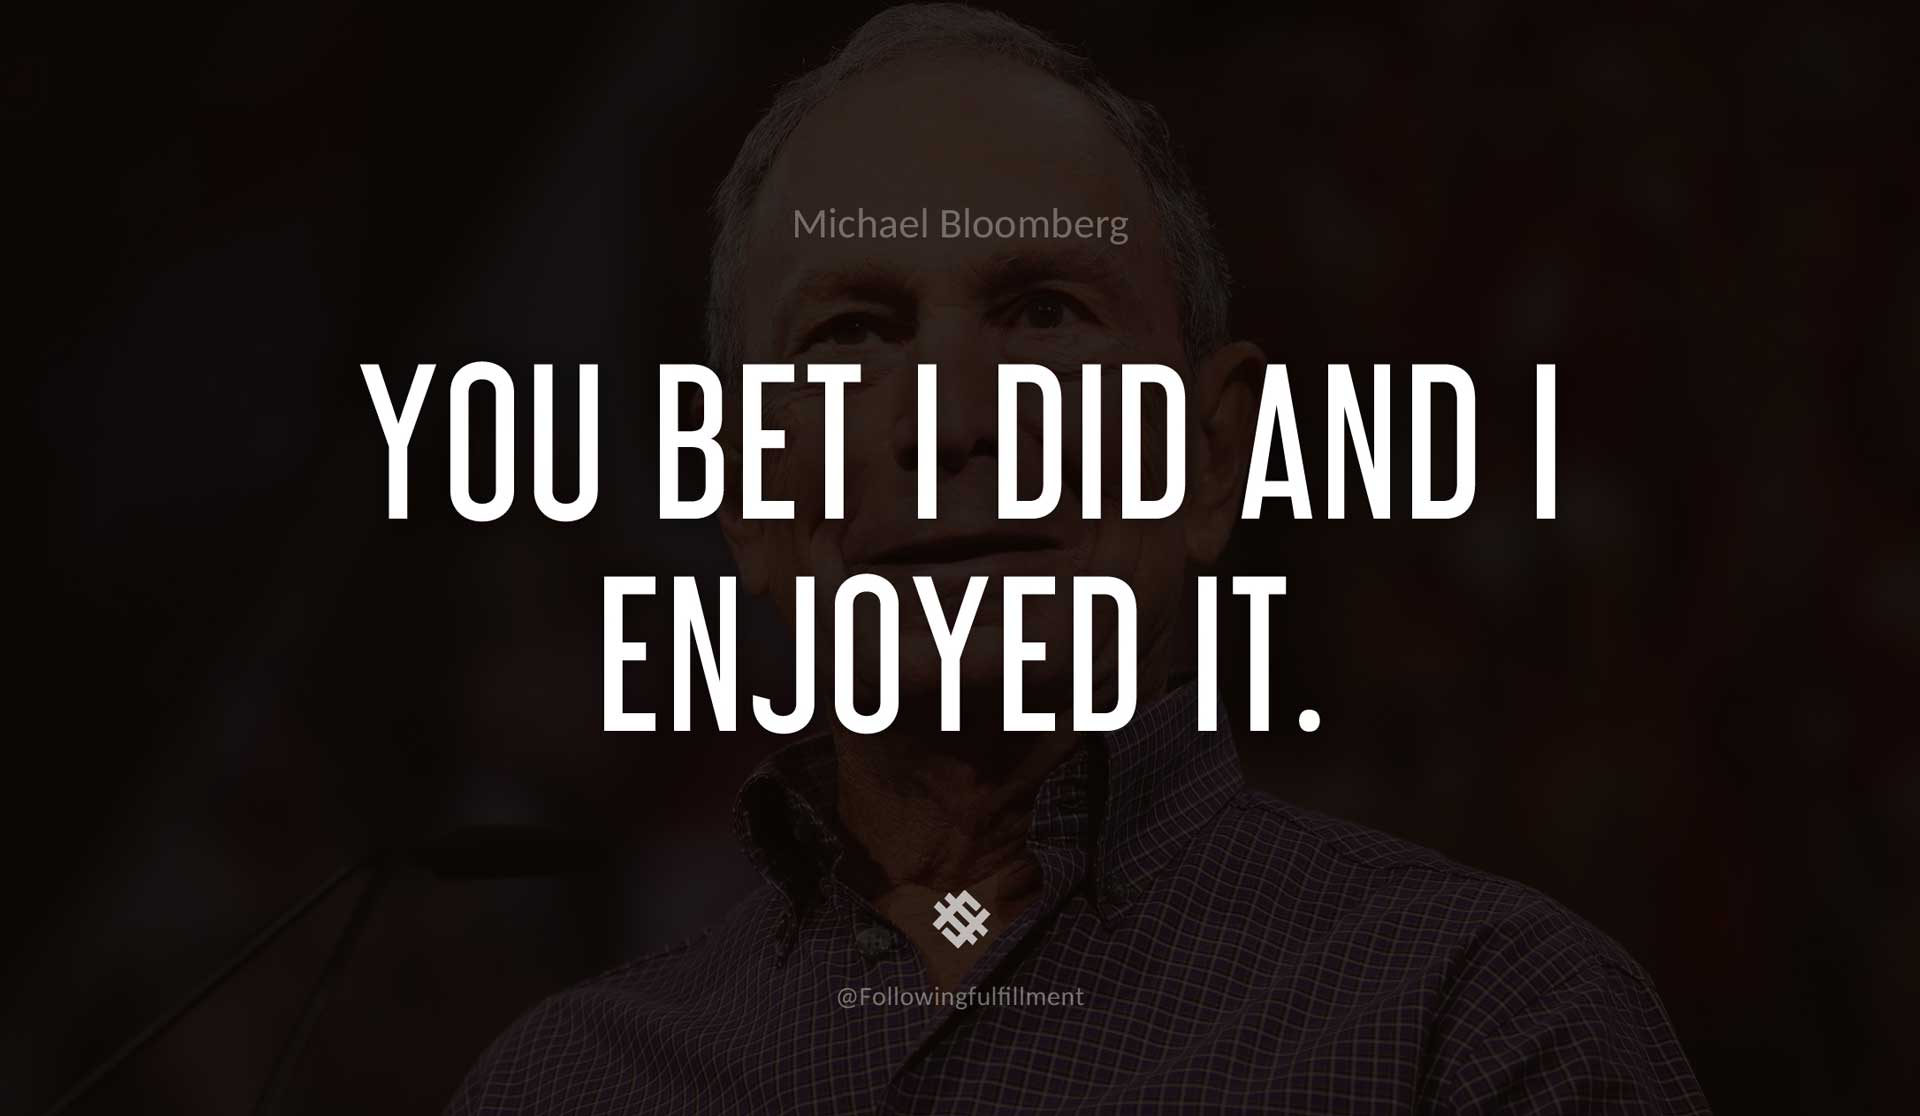 You-bet-I-did-and-I-enjoyed-it.-MICHAEL-BLOOMBERG-Quote.jpg